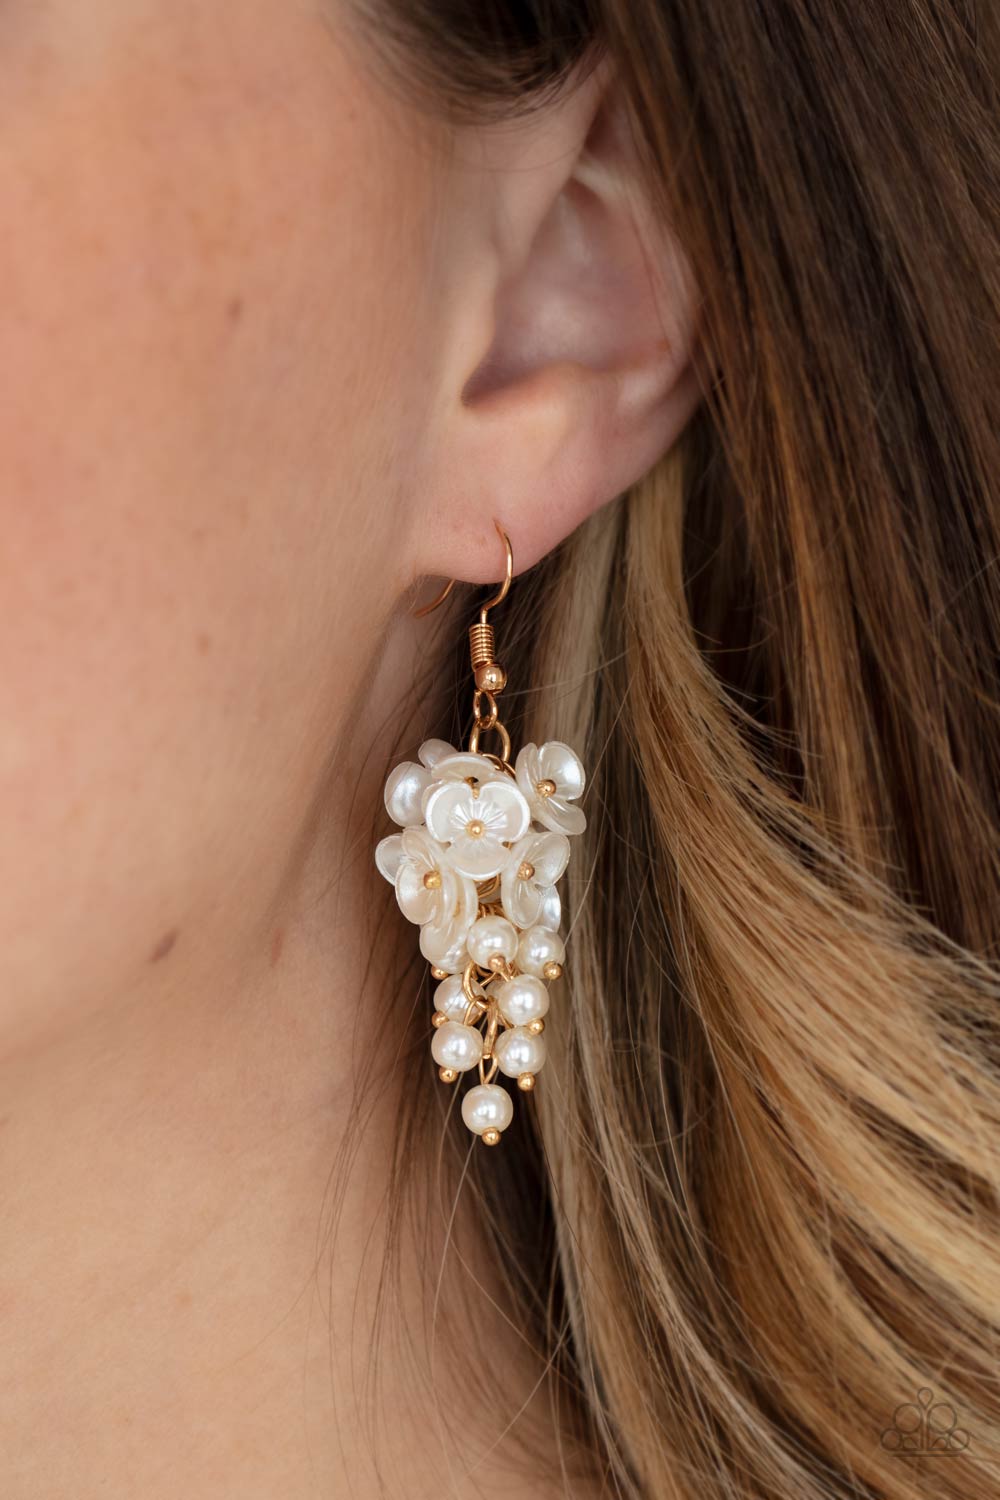 Bountiful Bouquets Gold and White Pearl Flower Earrings - Paparazzi Accessories Life of the Party Exclusive June 2021- model - CarasShop.com - $5 Jewelry by Cara Jewels